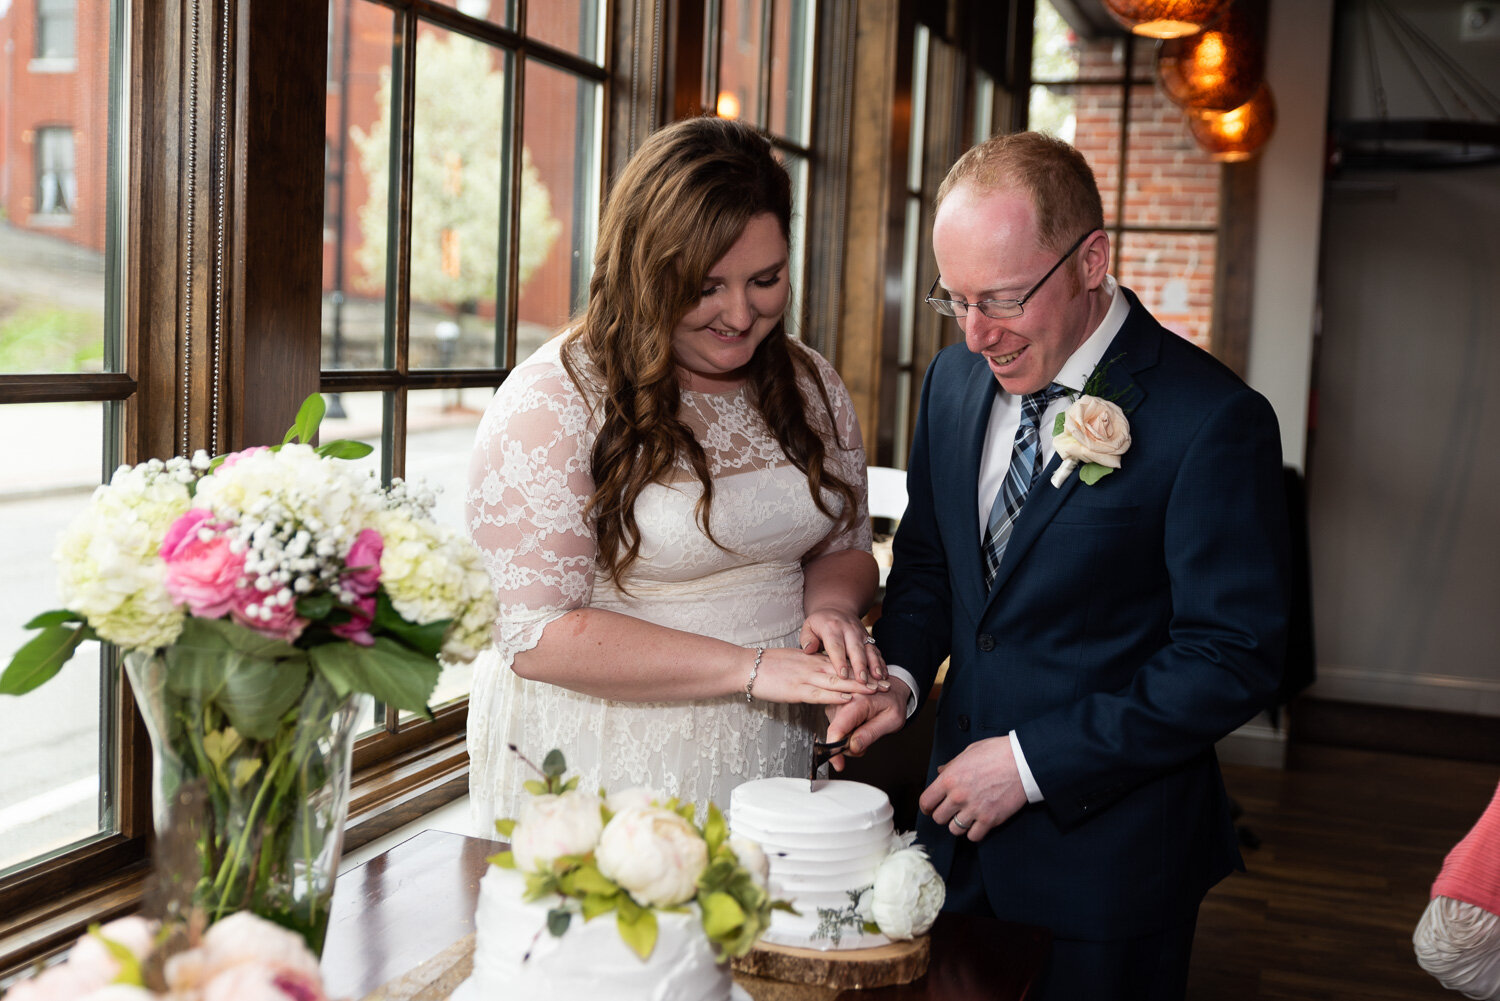 Rachel and David Married at Elm Park in Worcester, MA